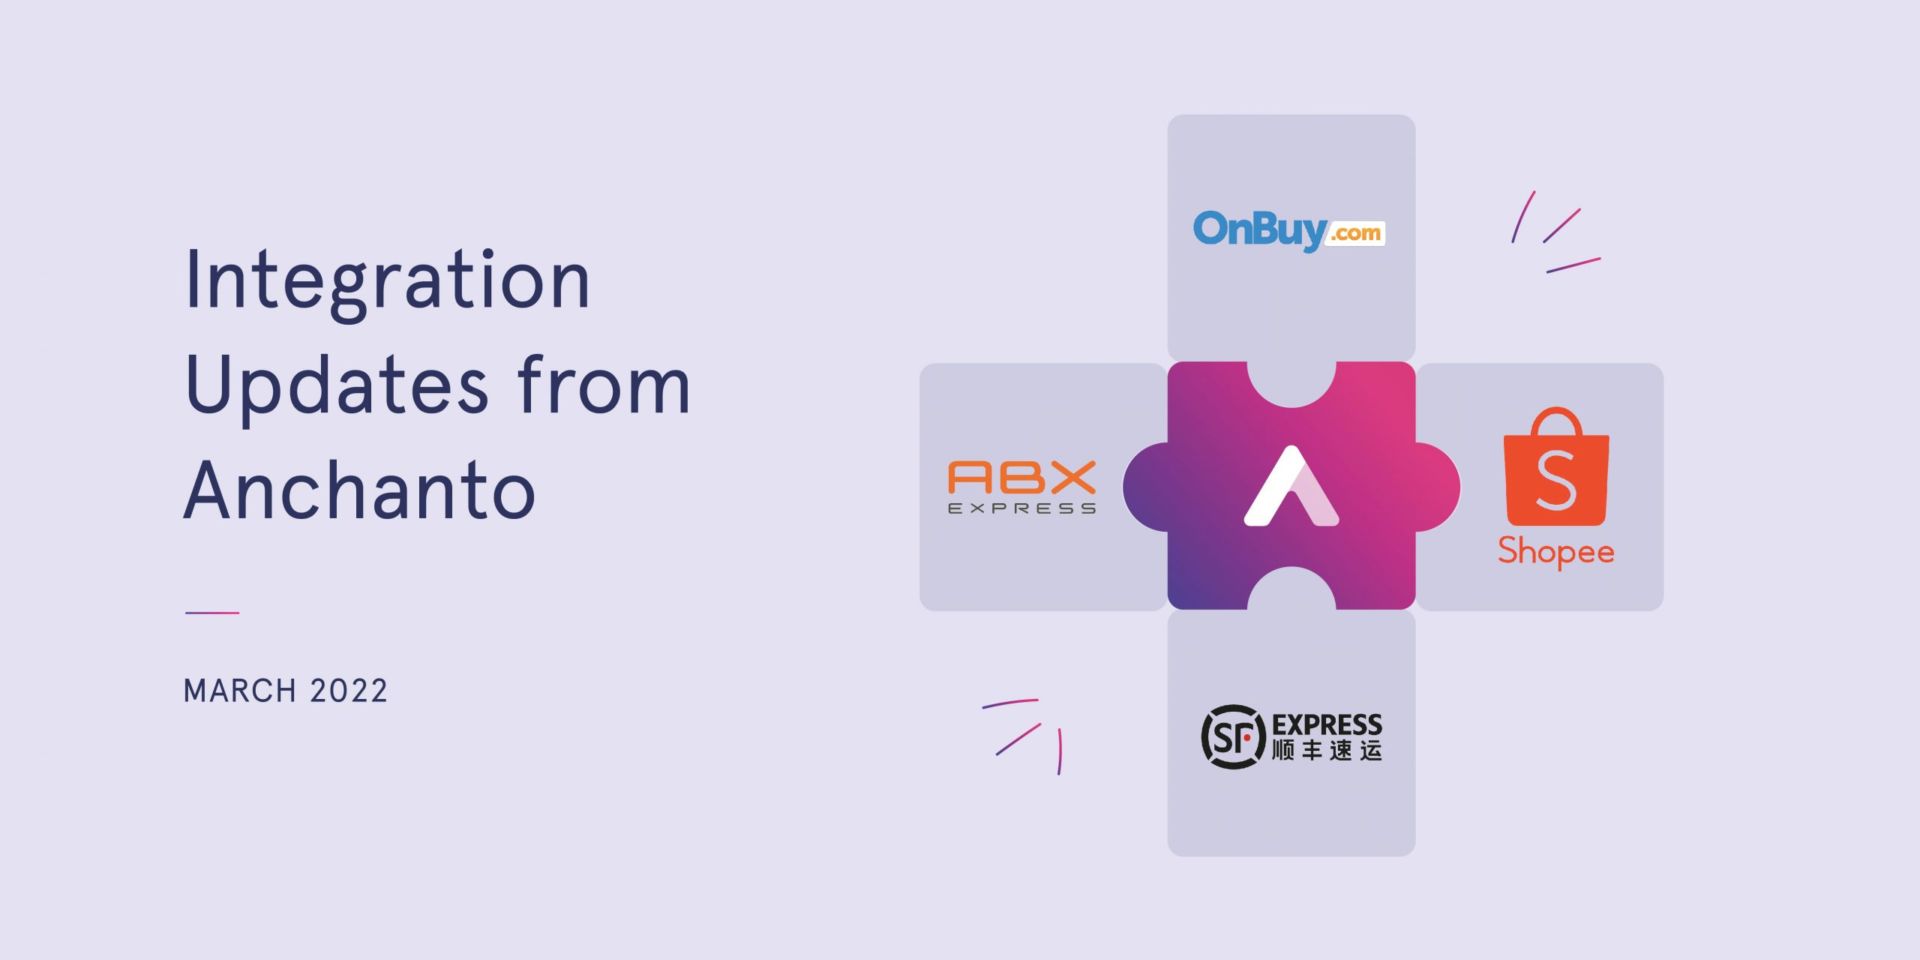 Anchanto Integrations Updates – March 2022